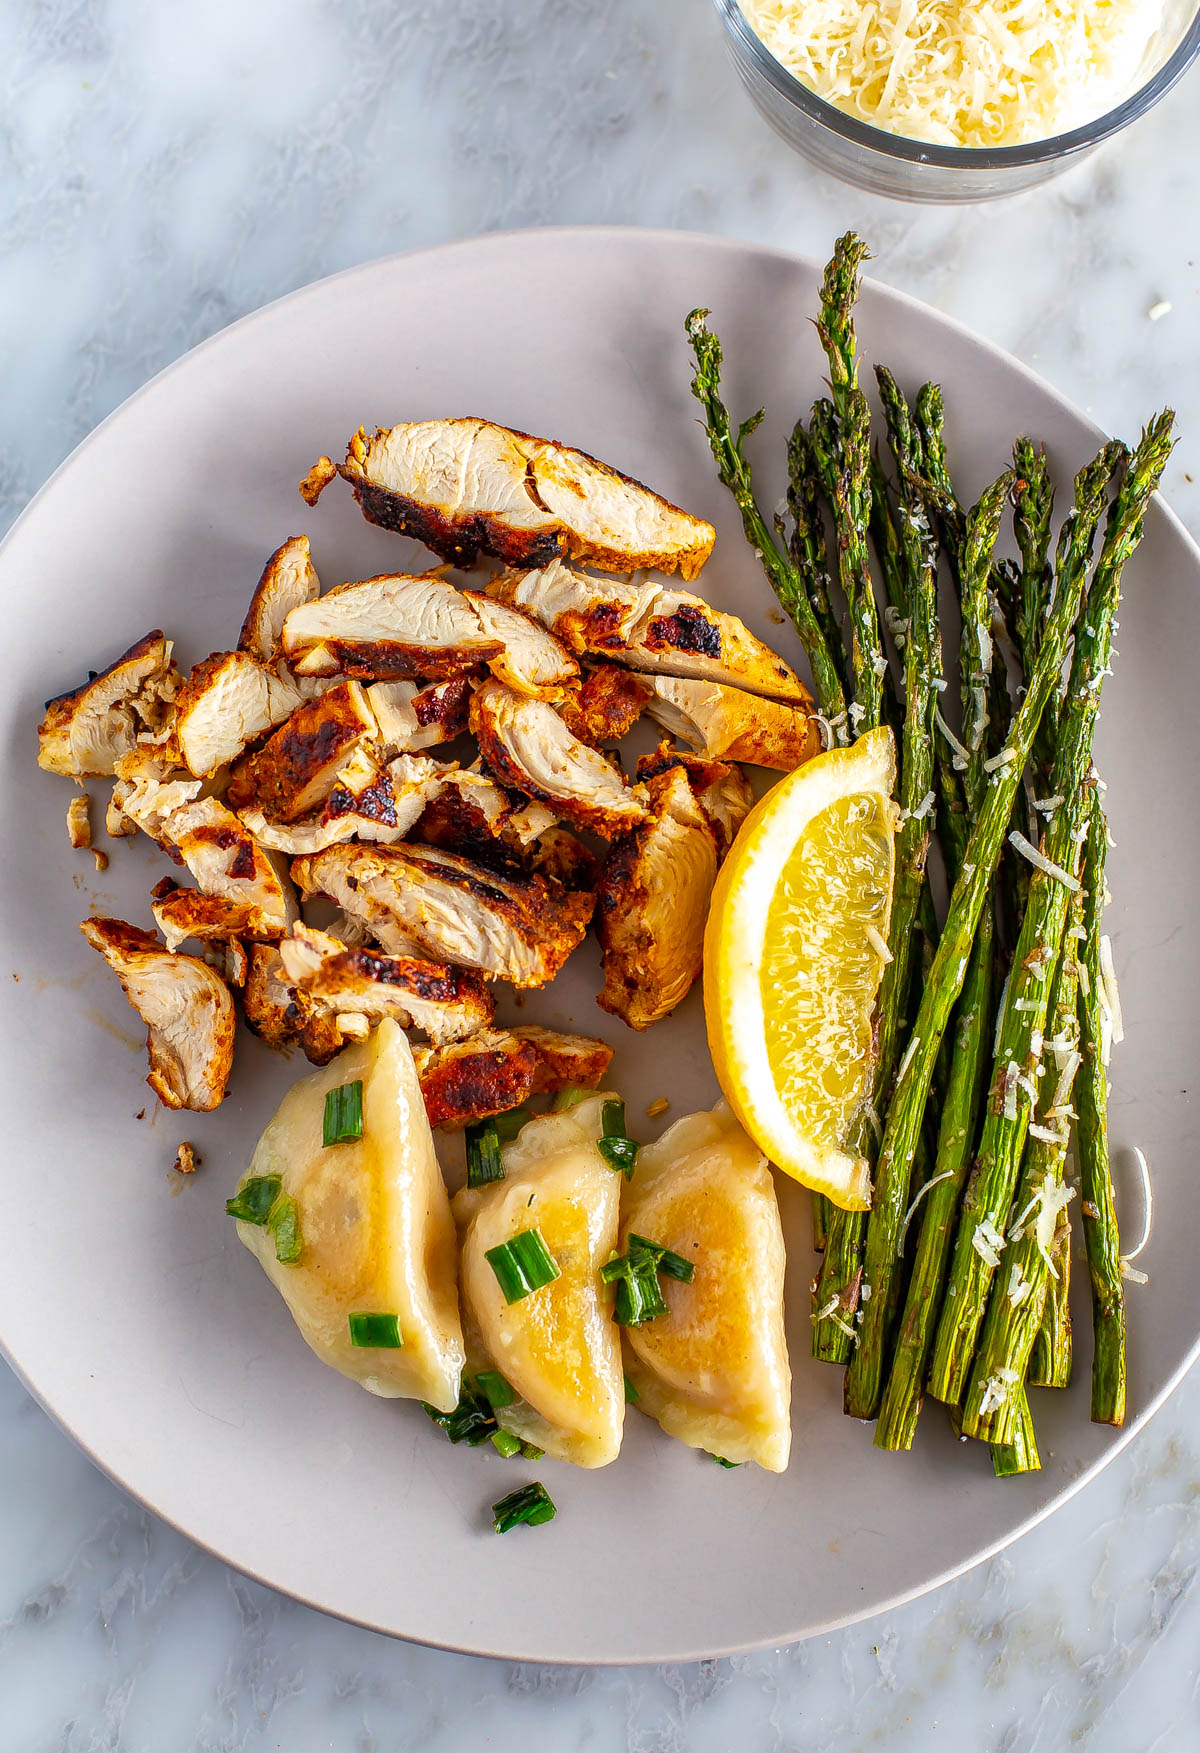 A plate with air fryer asparagus served with cut up chicken breasts and dumplings.